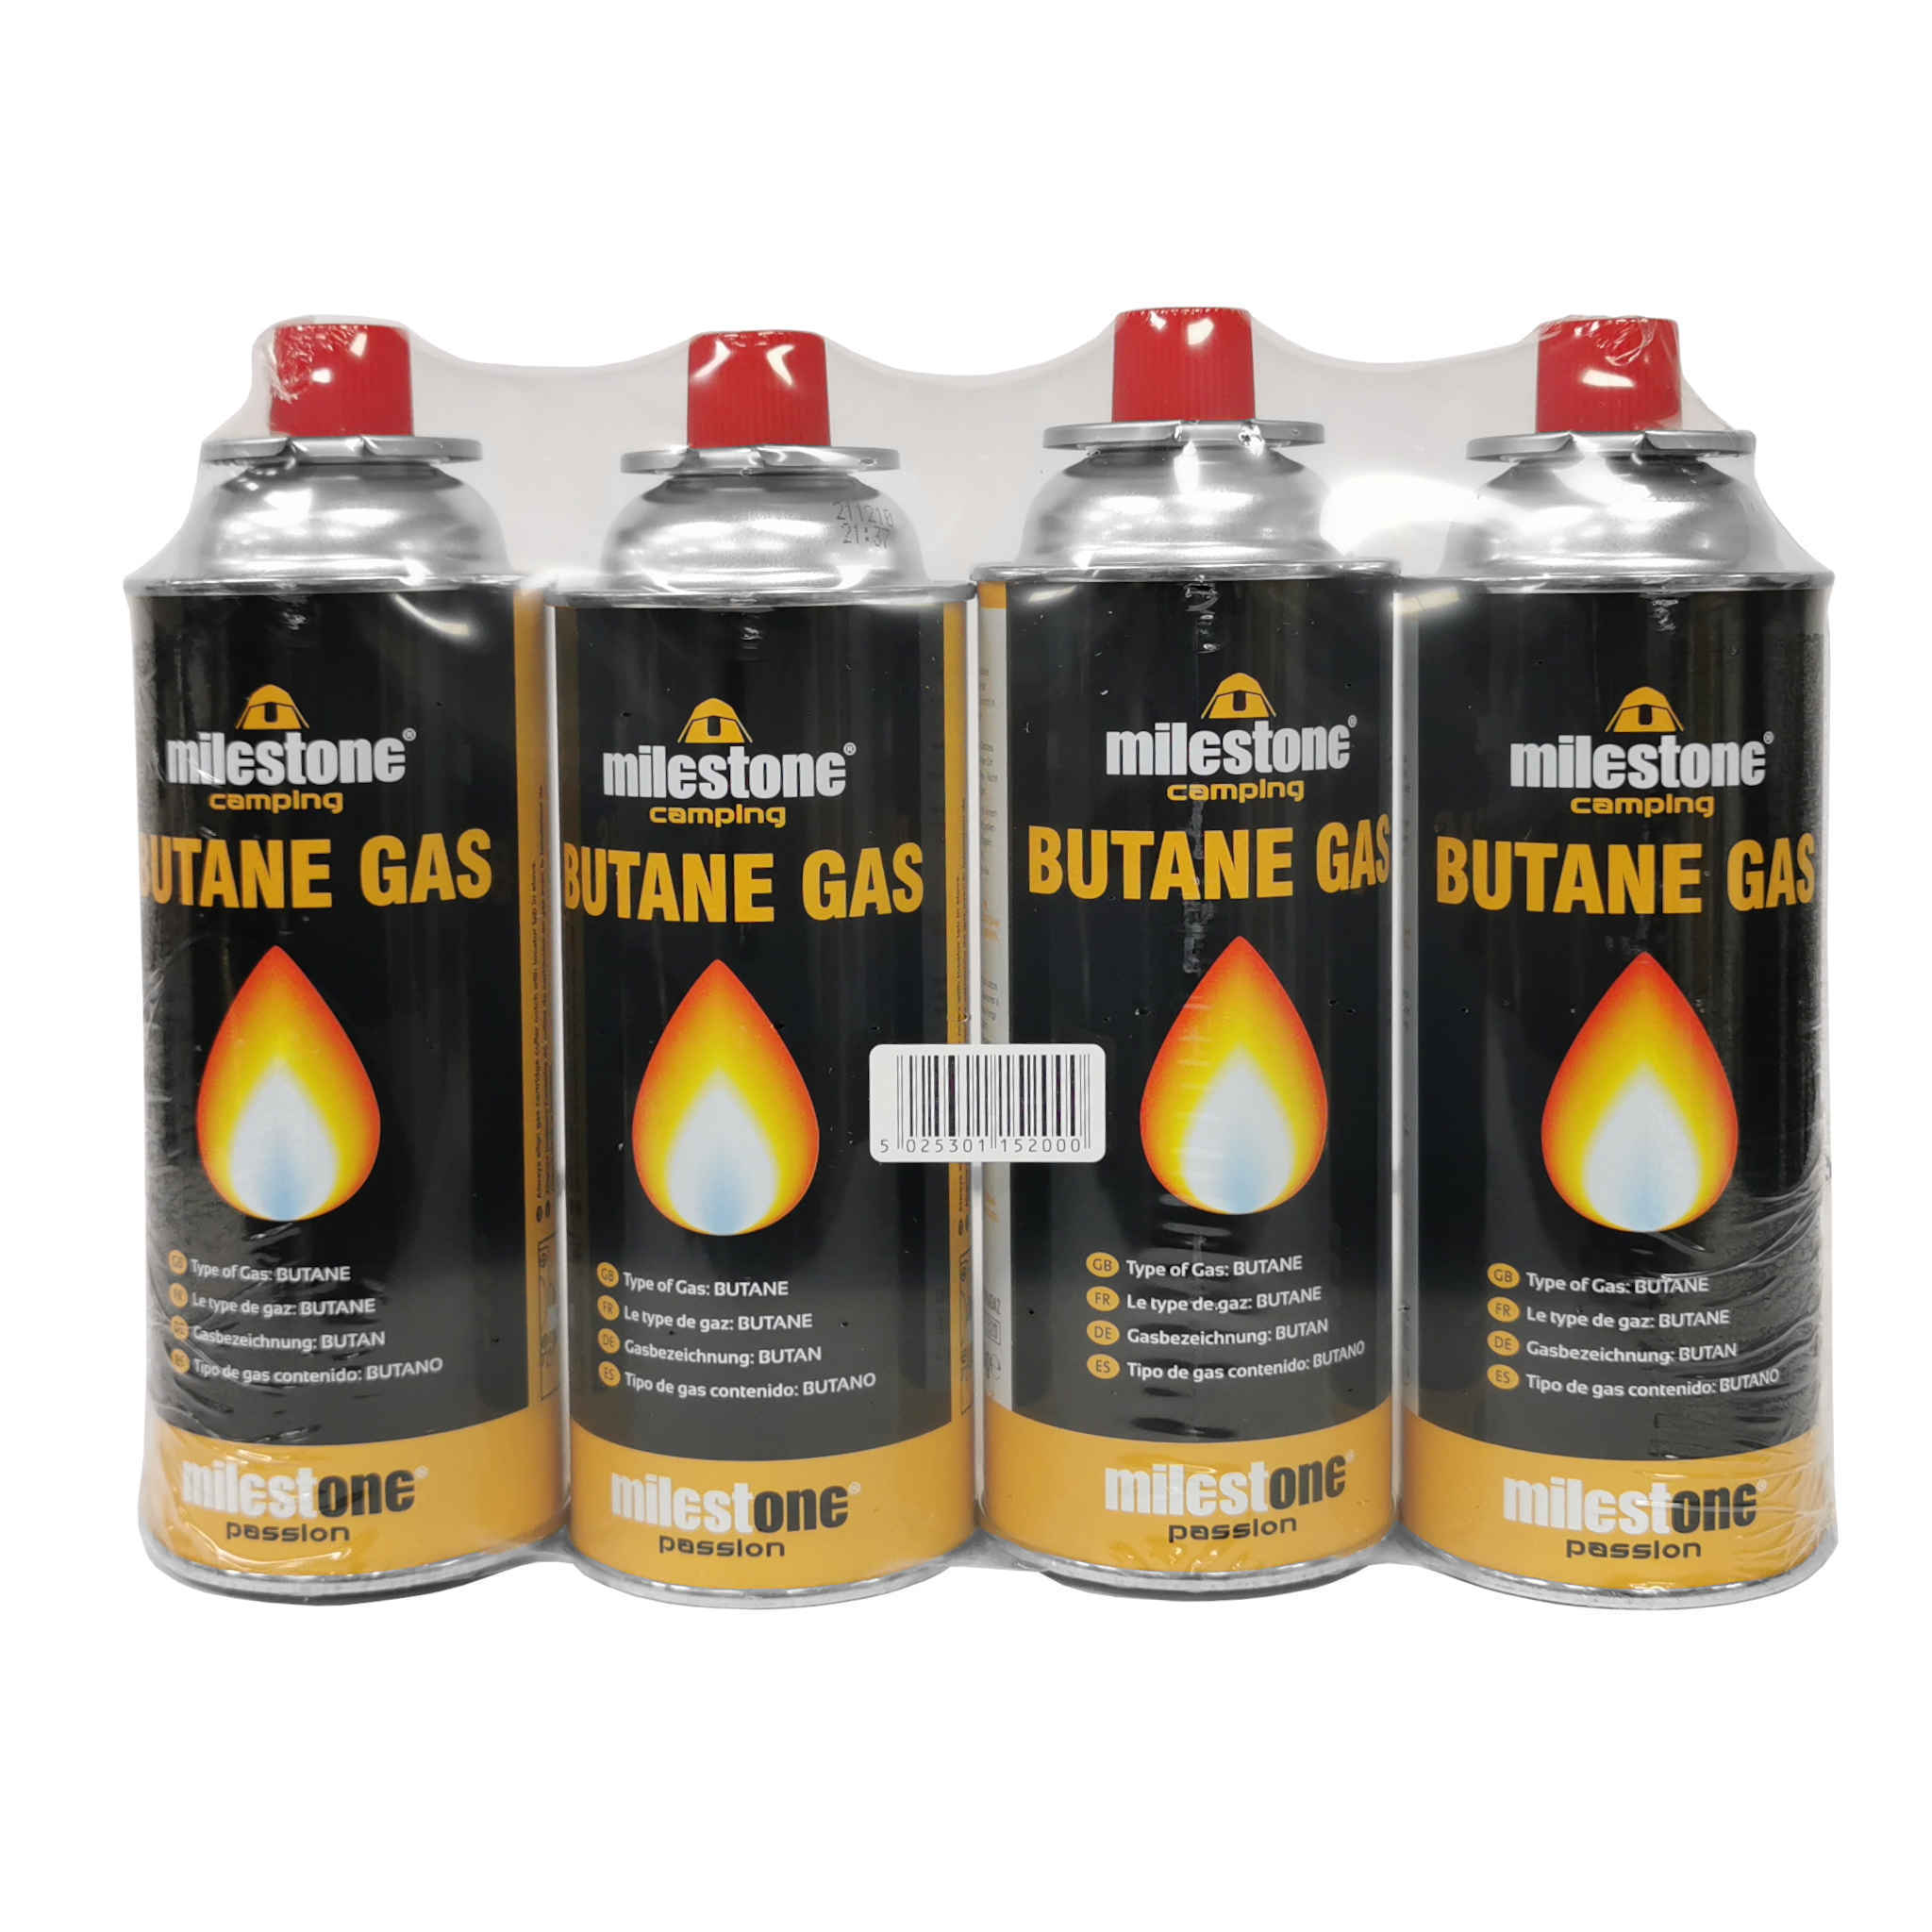 Milestone Camping Butane Gas Canister | 220g | 4 Pack